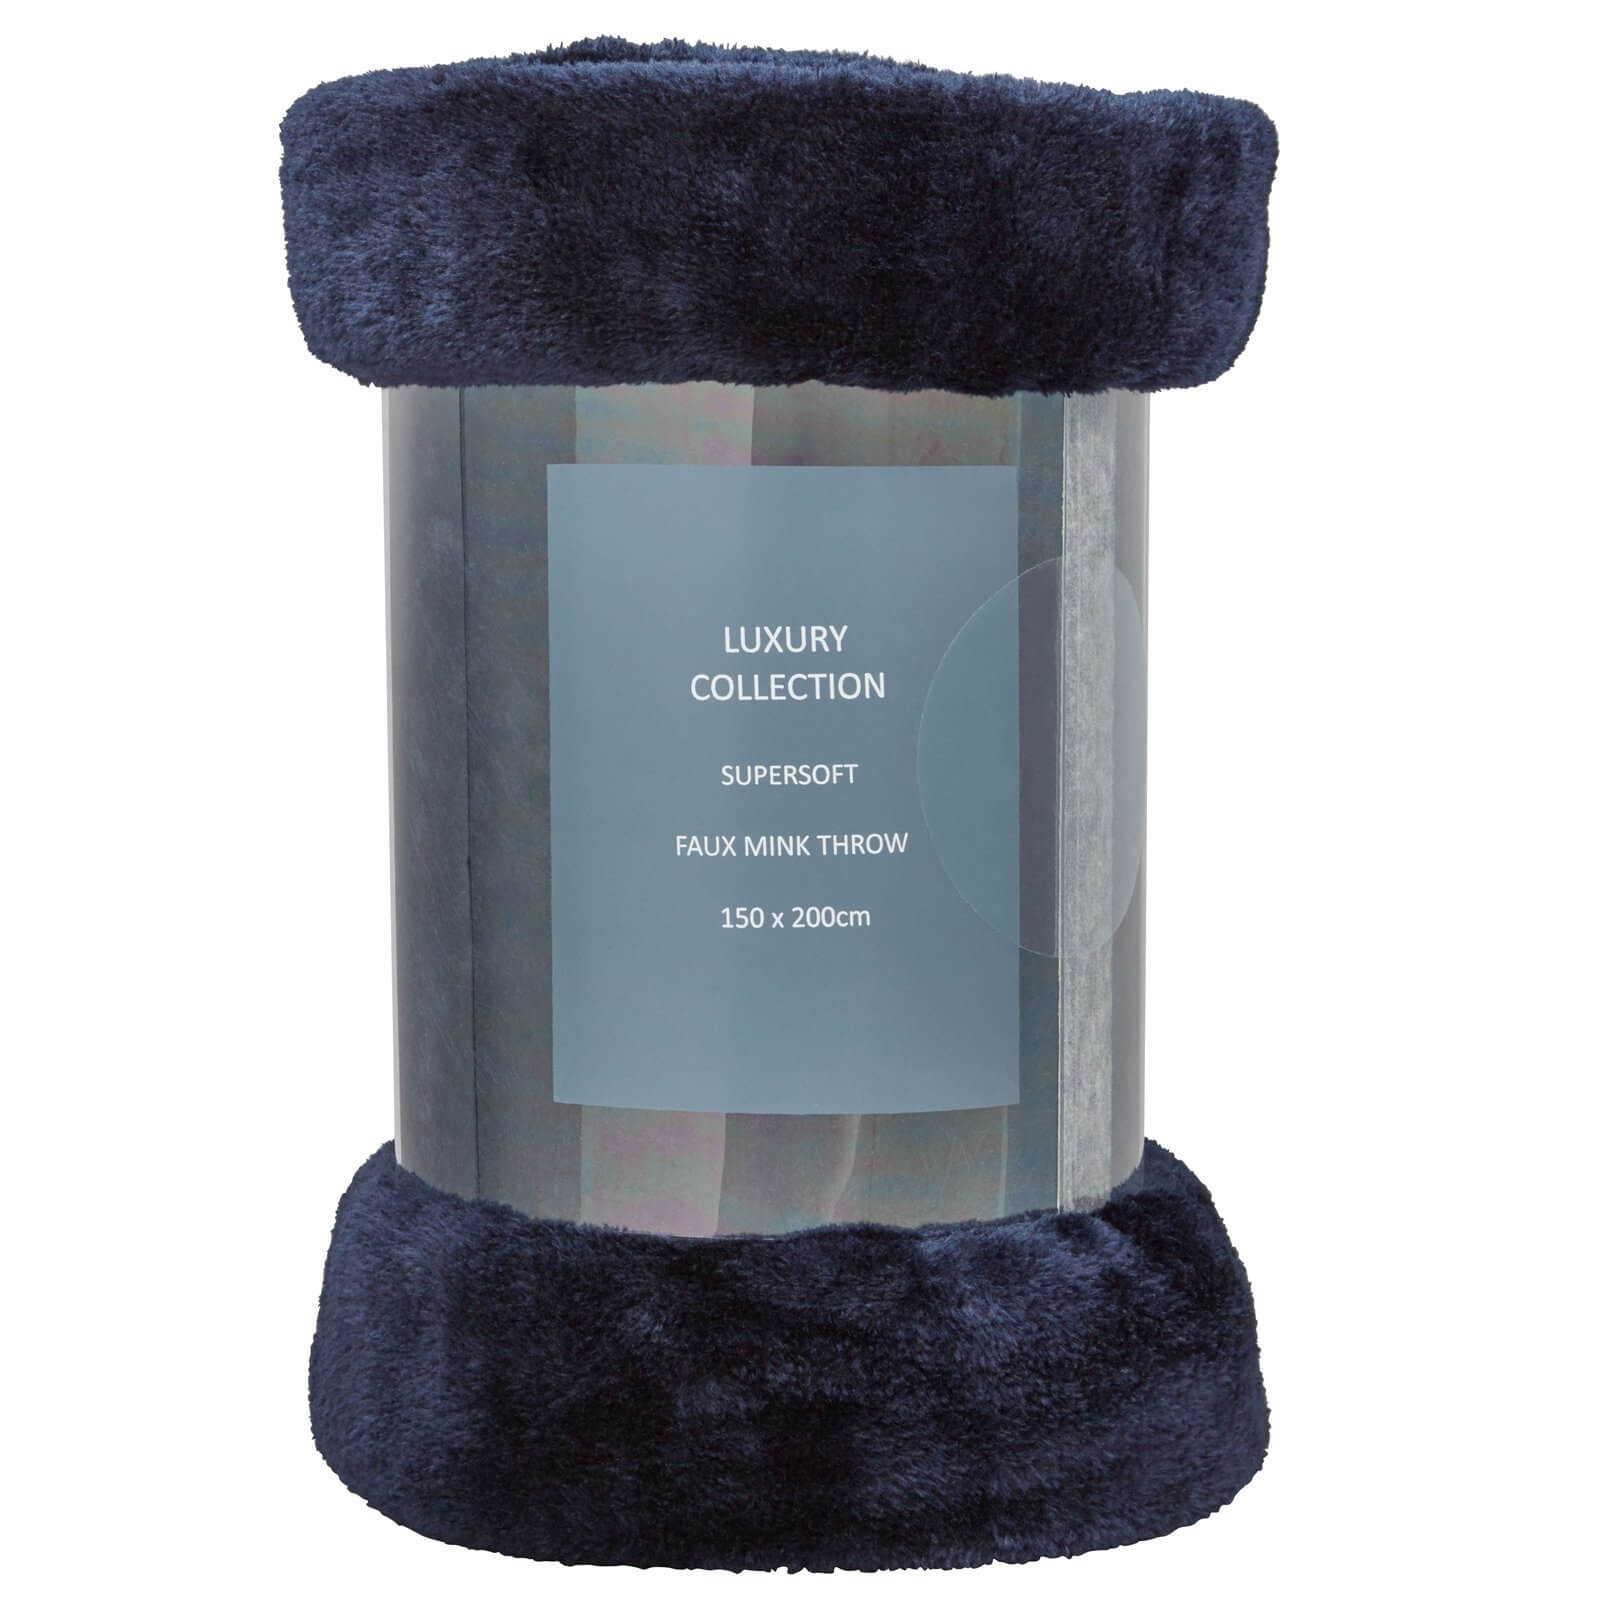 Faux Mink Throw - Navy